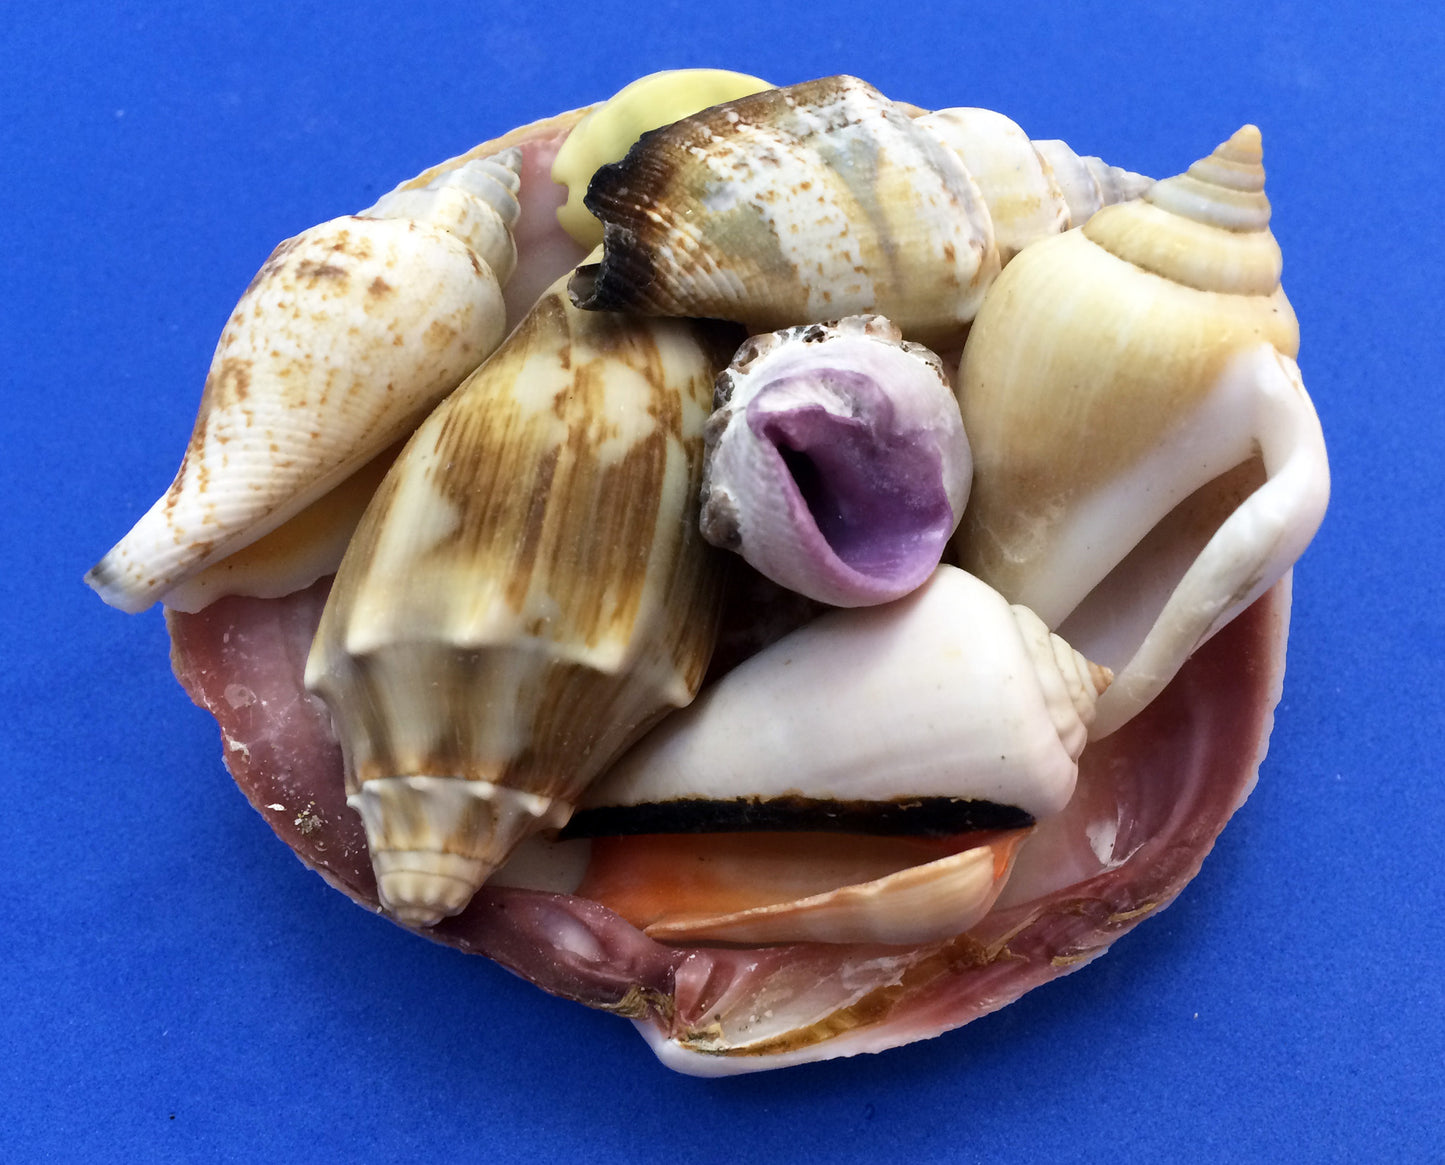 Science activity inspired by the book Over in an Ocean in a Coral Reef. Exploring seashells.